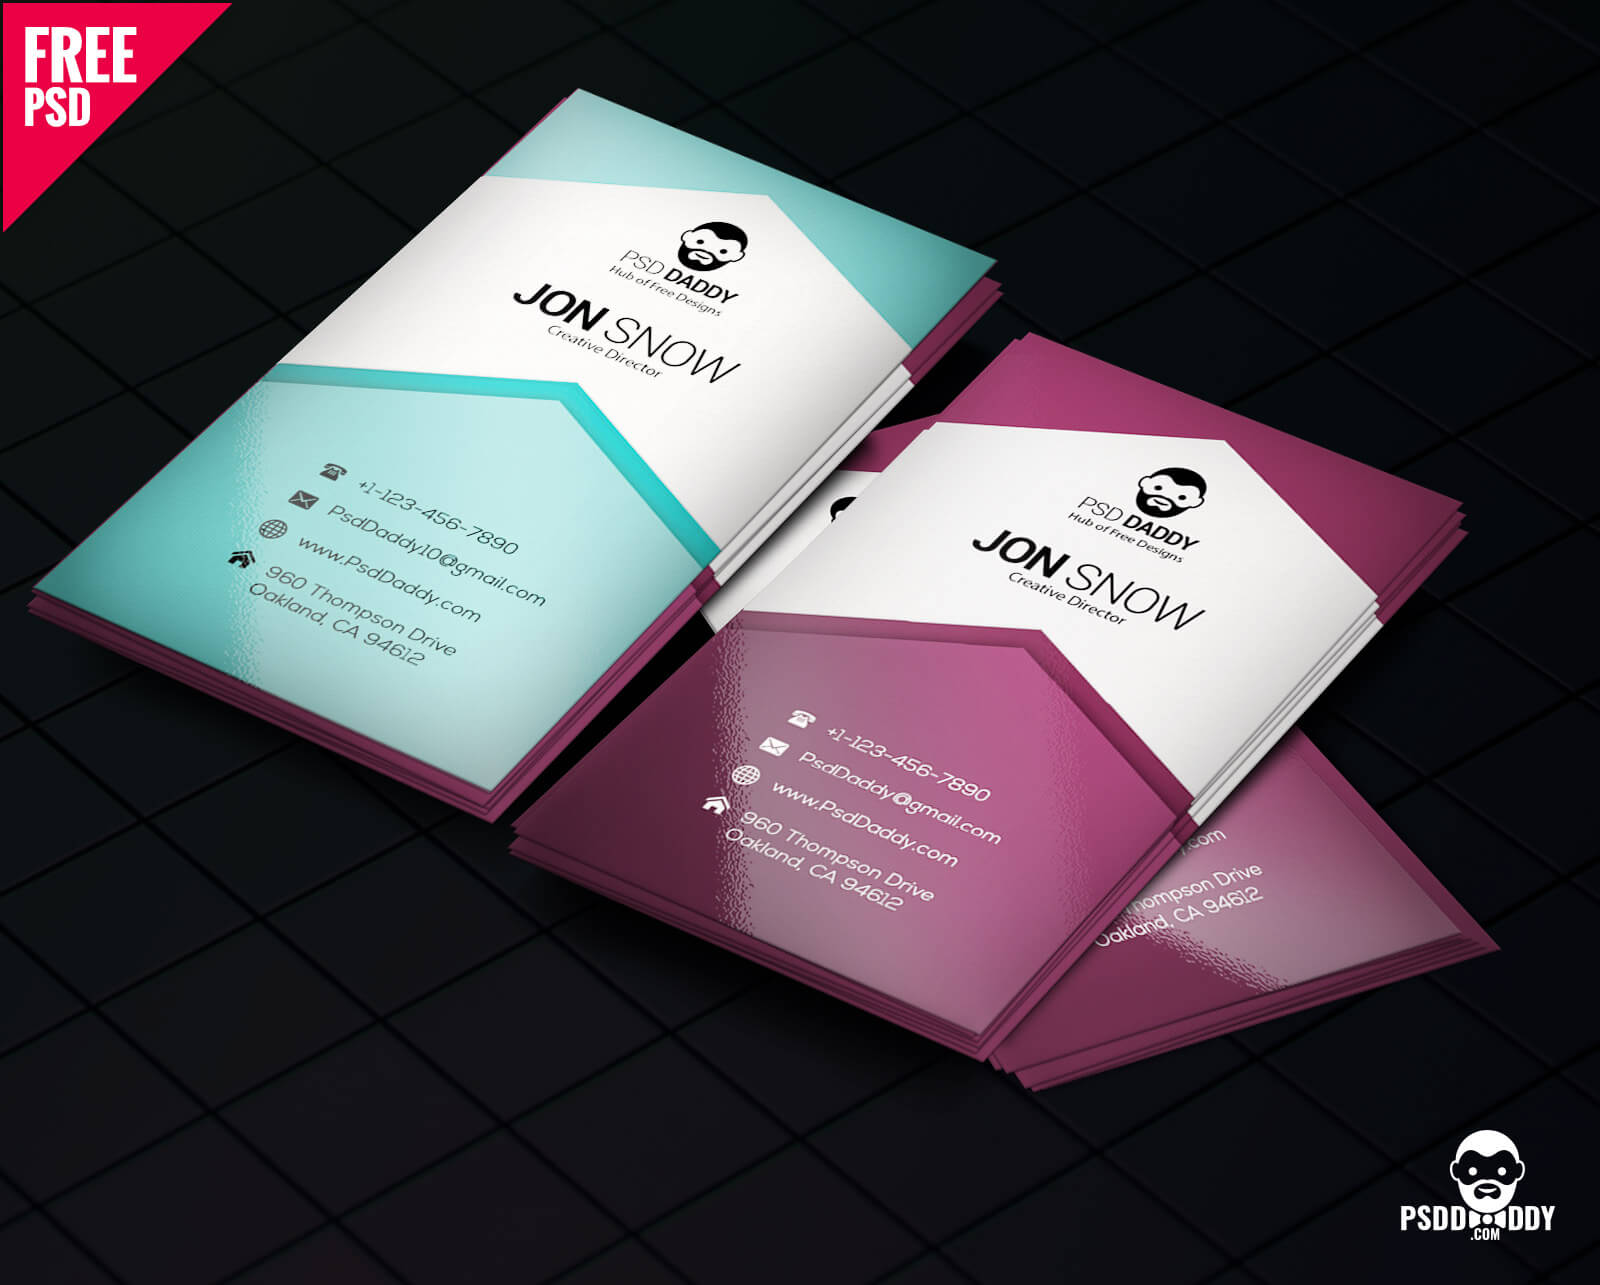 Download]Creative Business Card Psd Free | Psddaddy In Business Card Size Photoshop Template